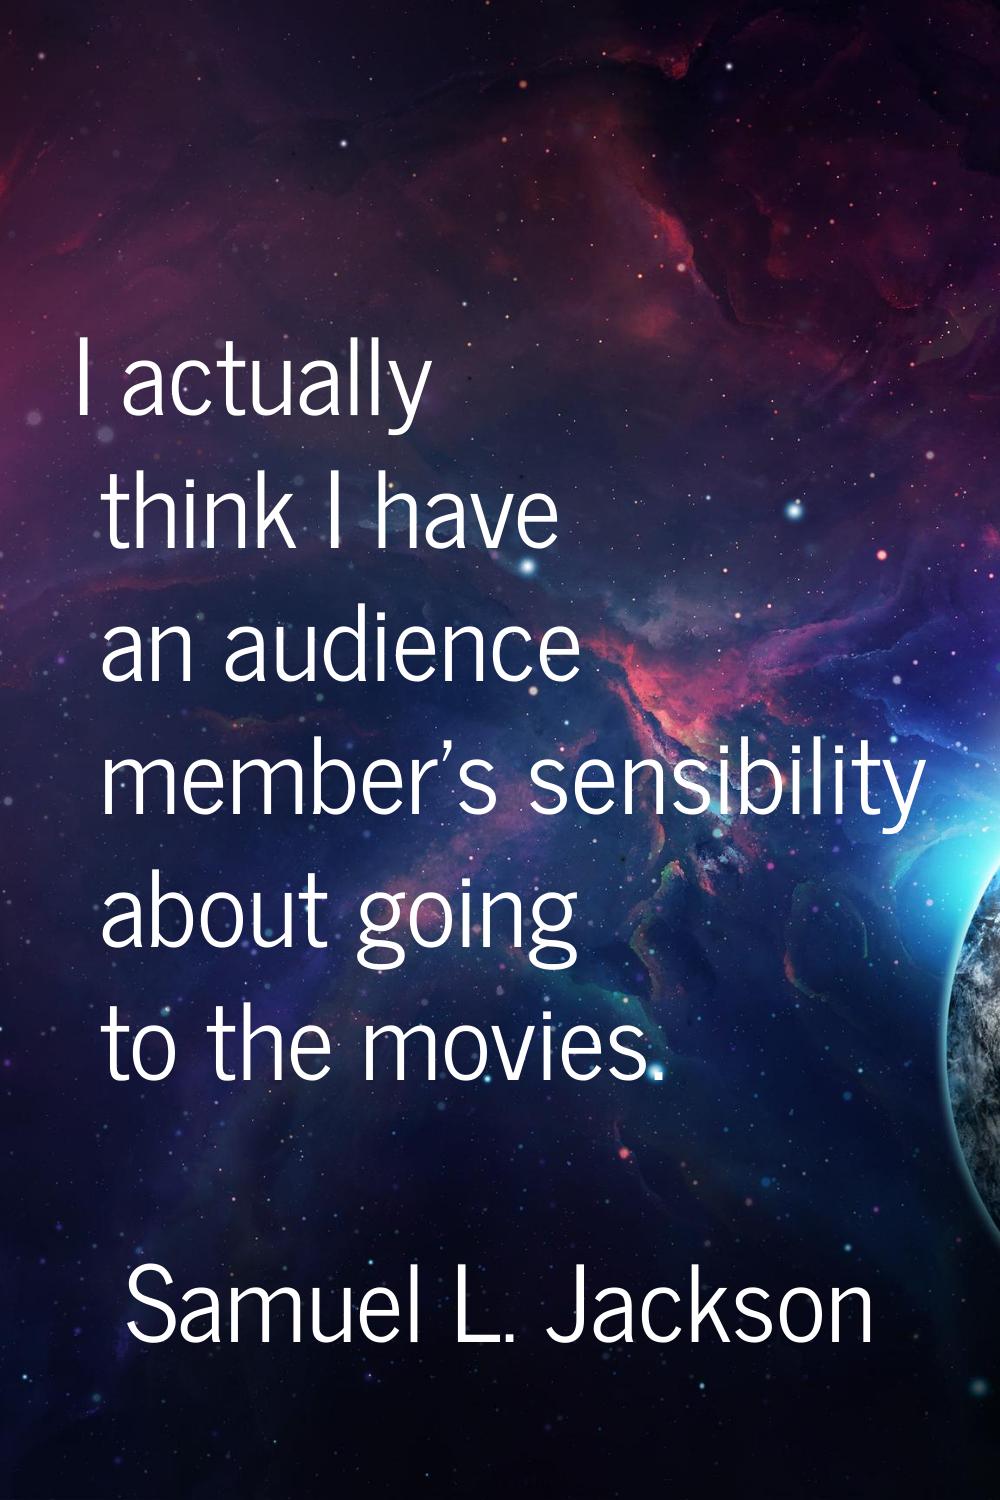 I actually think I have an audience member's sensibility about going to the movies.